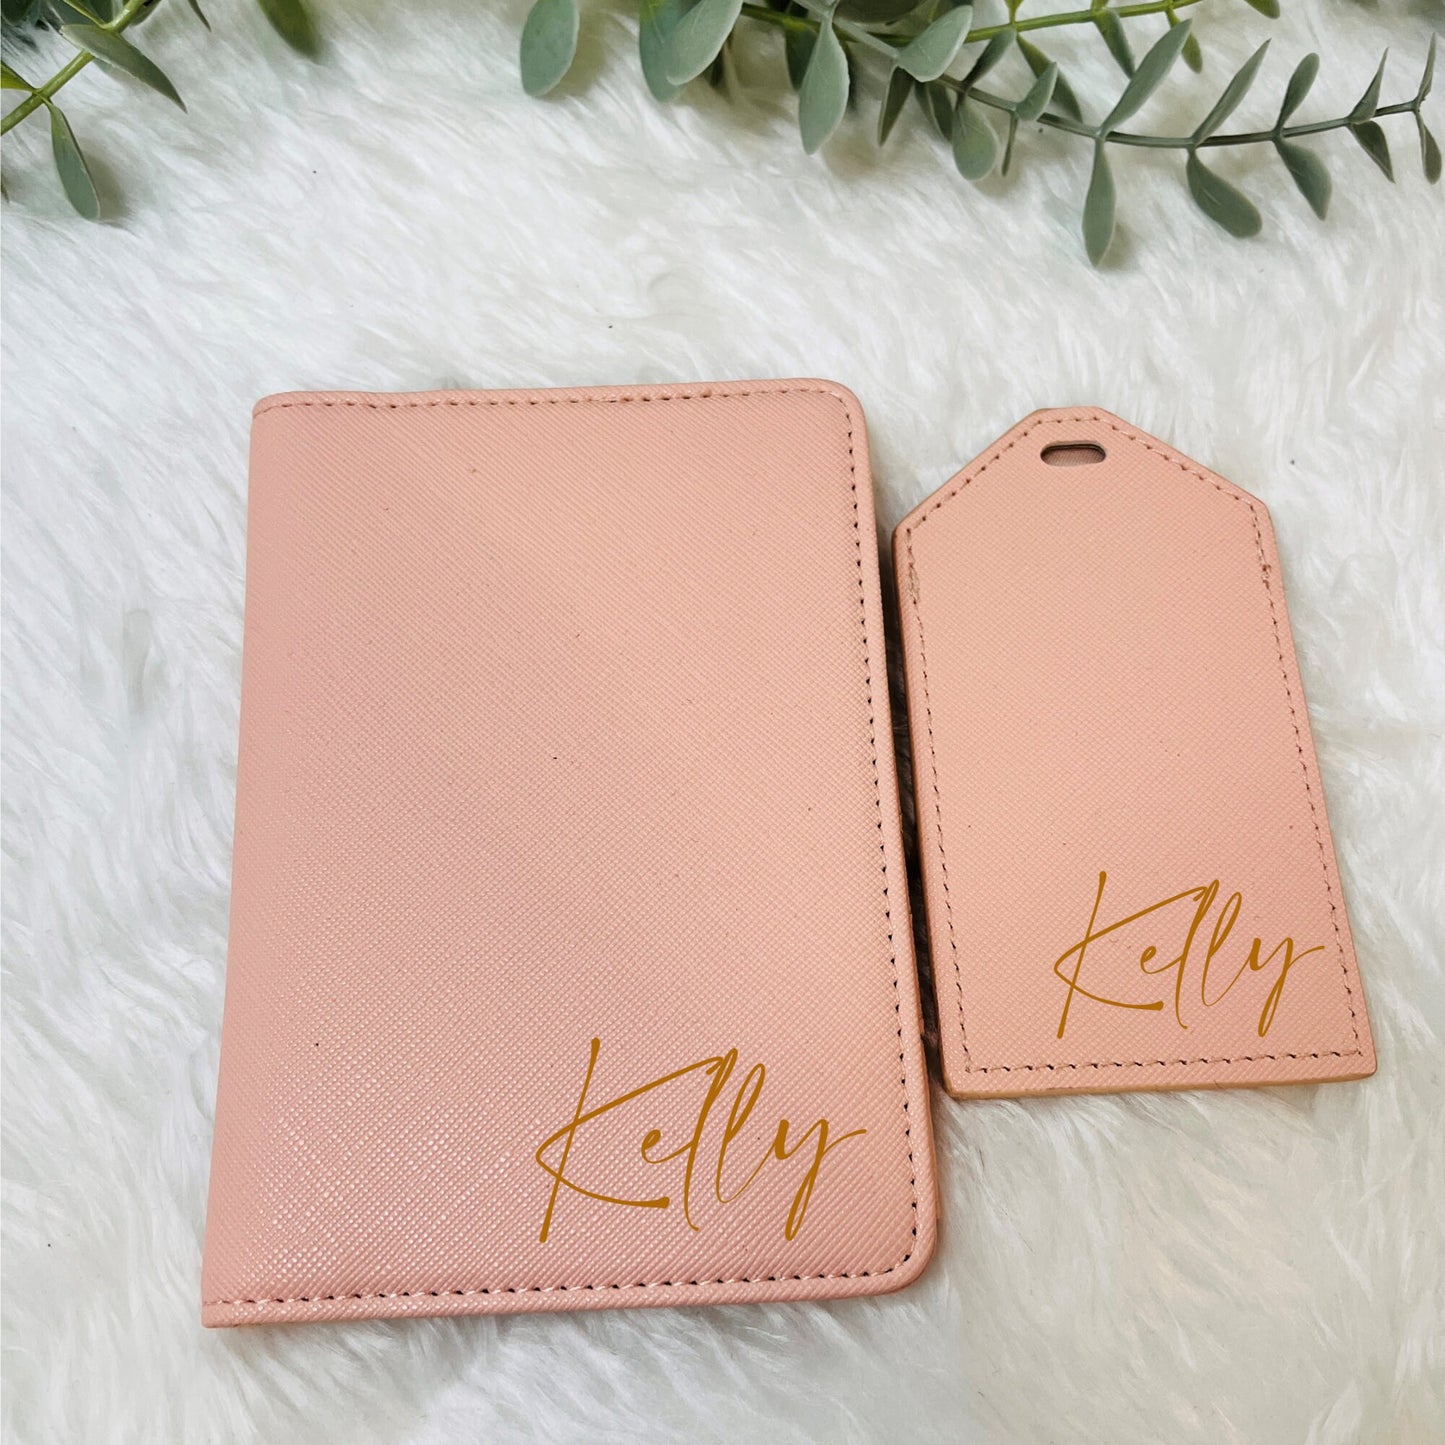 Personalised Faux Leather Passport Cover and Luggage Tag, Travel Accessories, Gift for Newlyweds